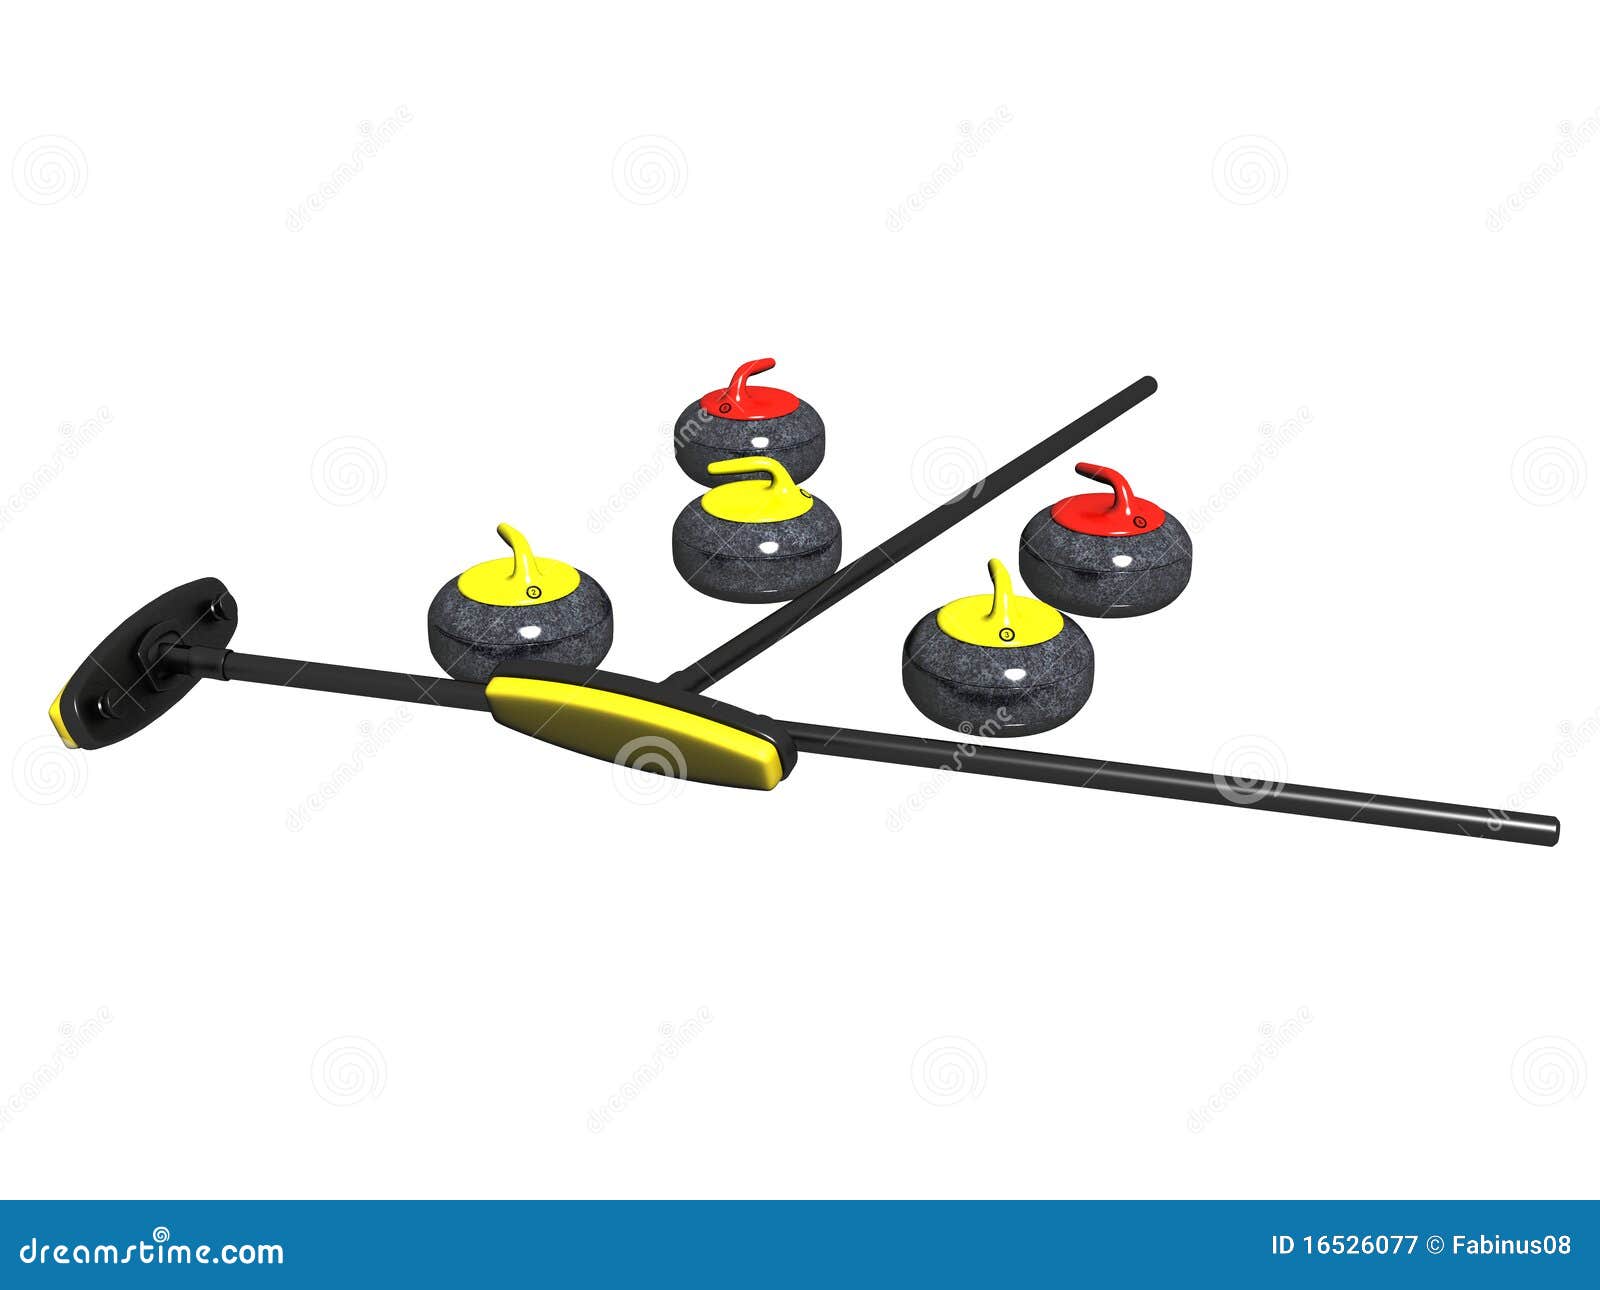 curling rings clipart - photo #8